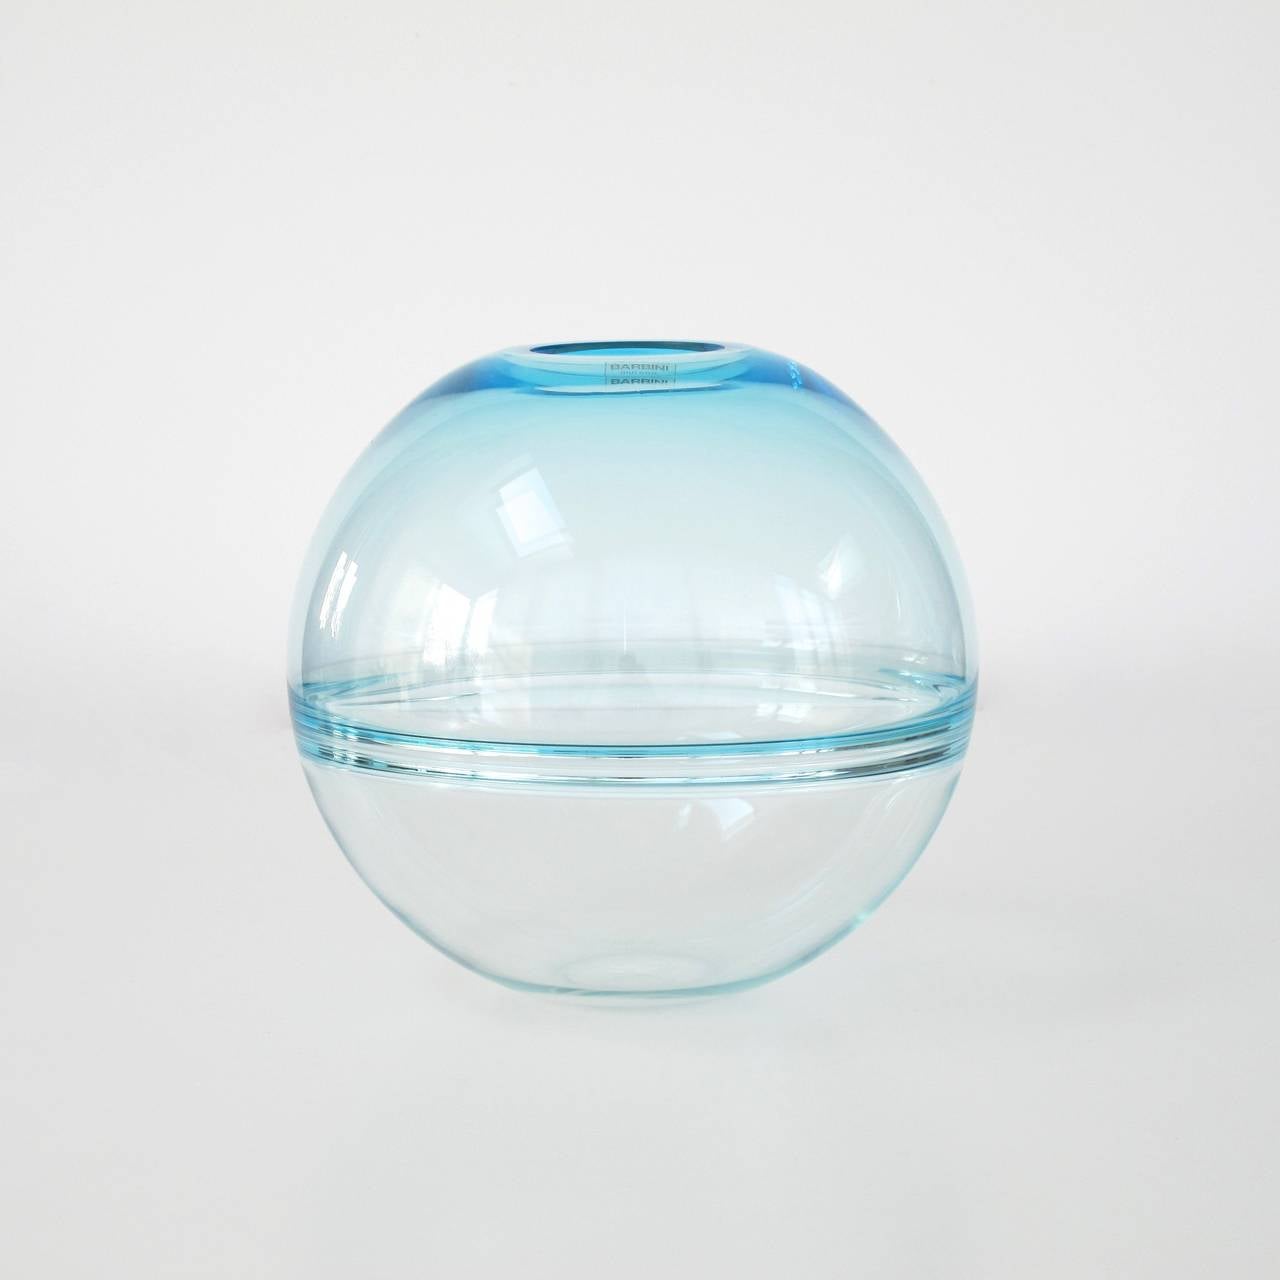 Rare spherical clear glass vase, designed by Alfredo Barbini for Murano. The piece is in an excellent condition and signed twice; Barbini Murano is carved on the bottom and on a sticker on the top rim.